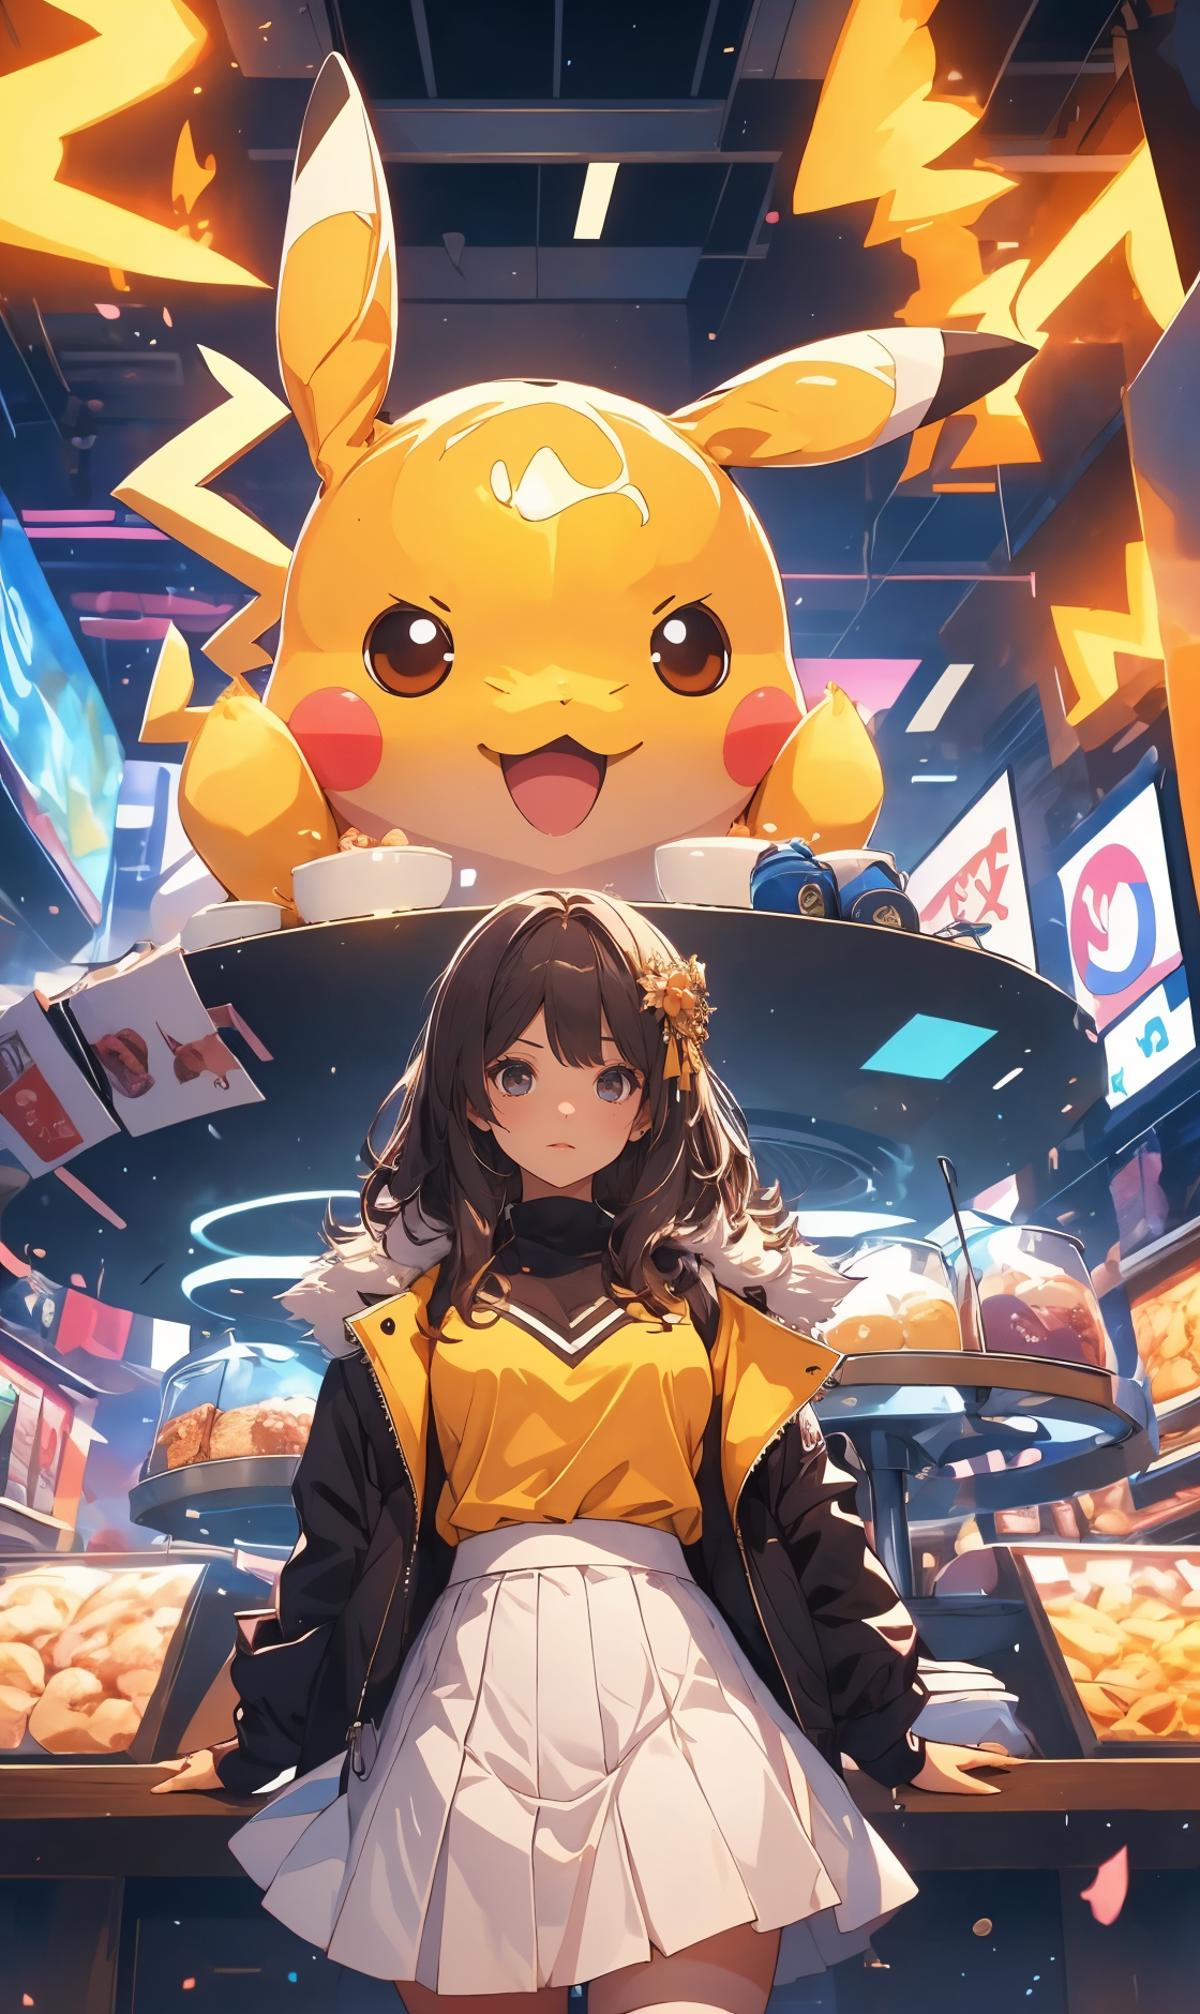 A young woman stands in front of a giant yellow Pokemon, with various food items and cups in the background.